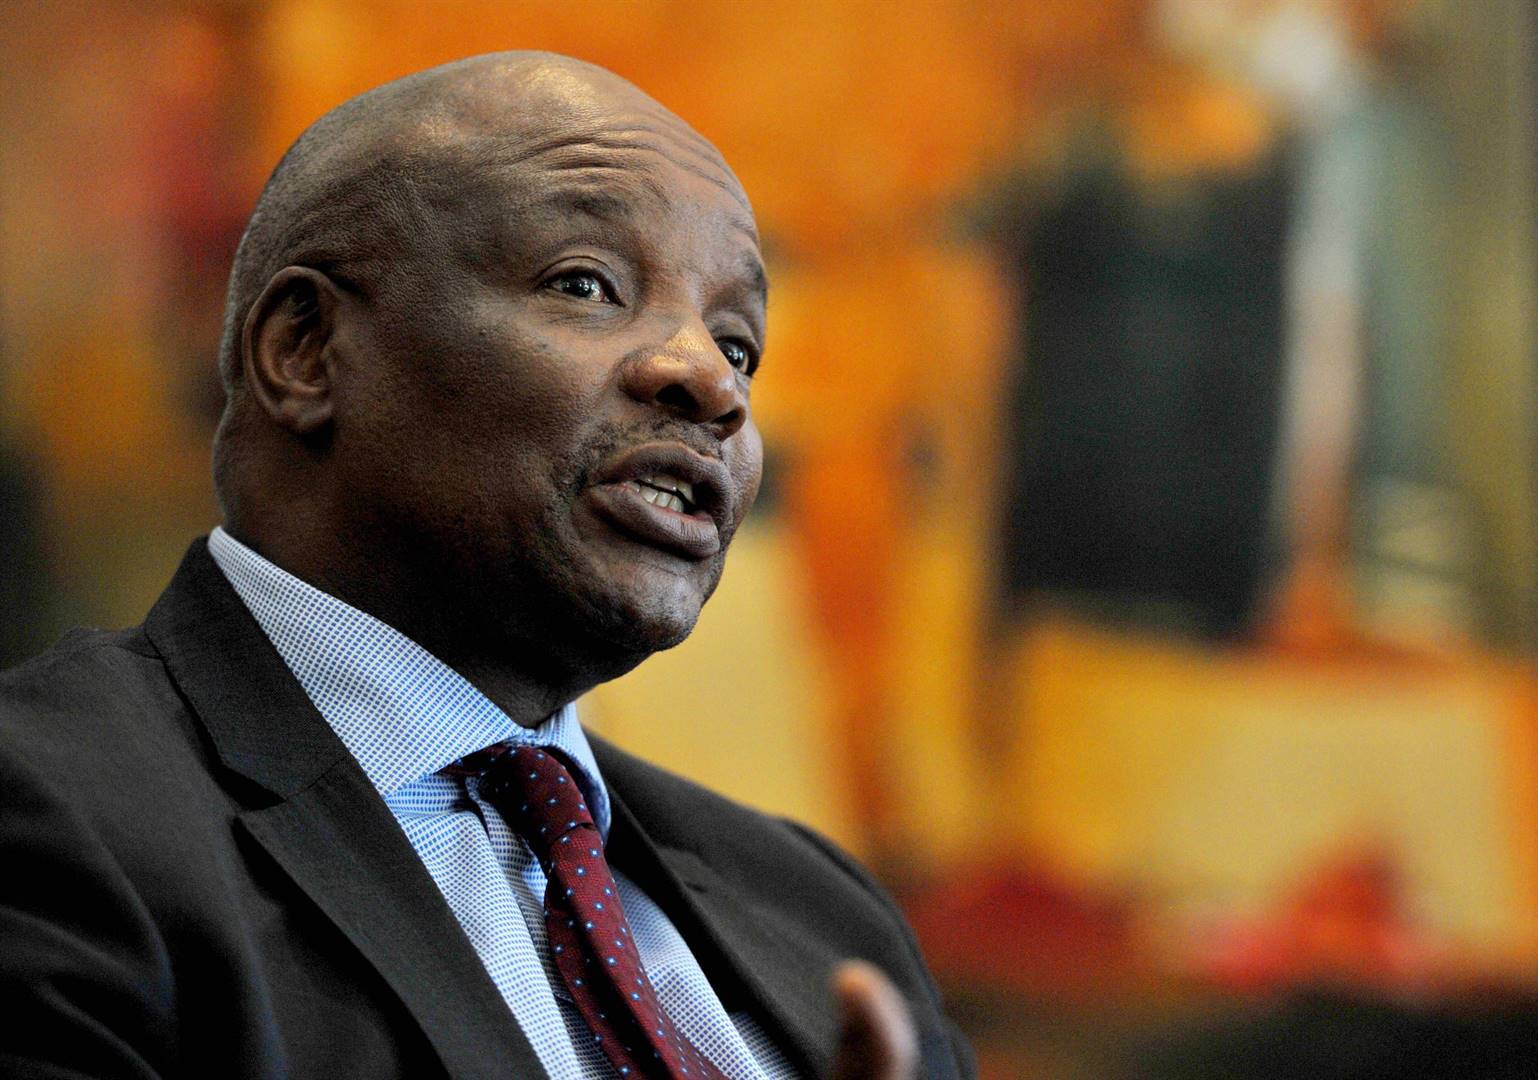 Absa has thrown its knockout punch against Sipho Pityana, removing him as a board member after the businessman was recently dealt with several body blows including being rejected as chairperson of the banking group. 